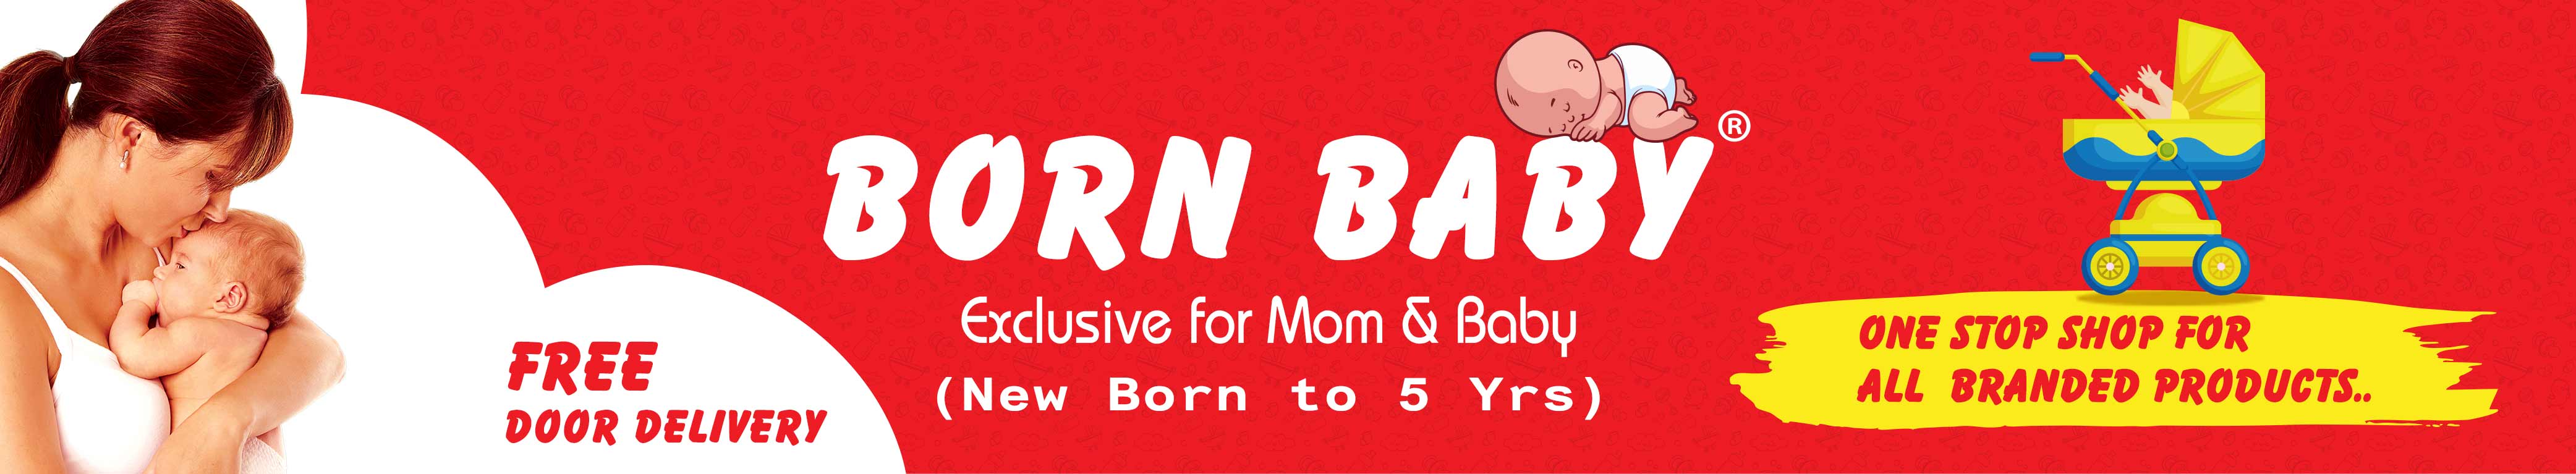 Born Baby Exclusive For Mom and Baby Banner Image